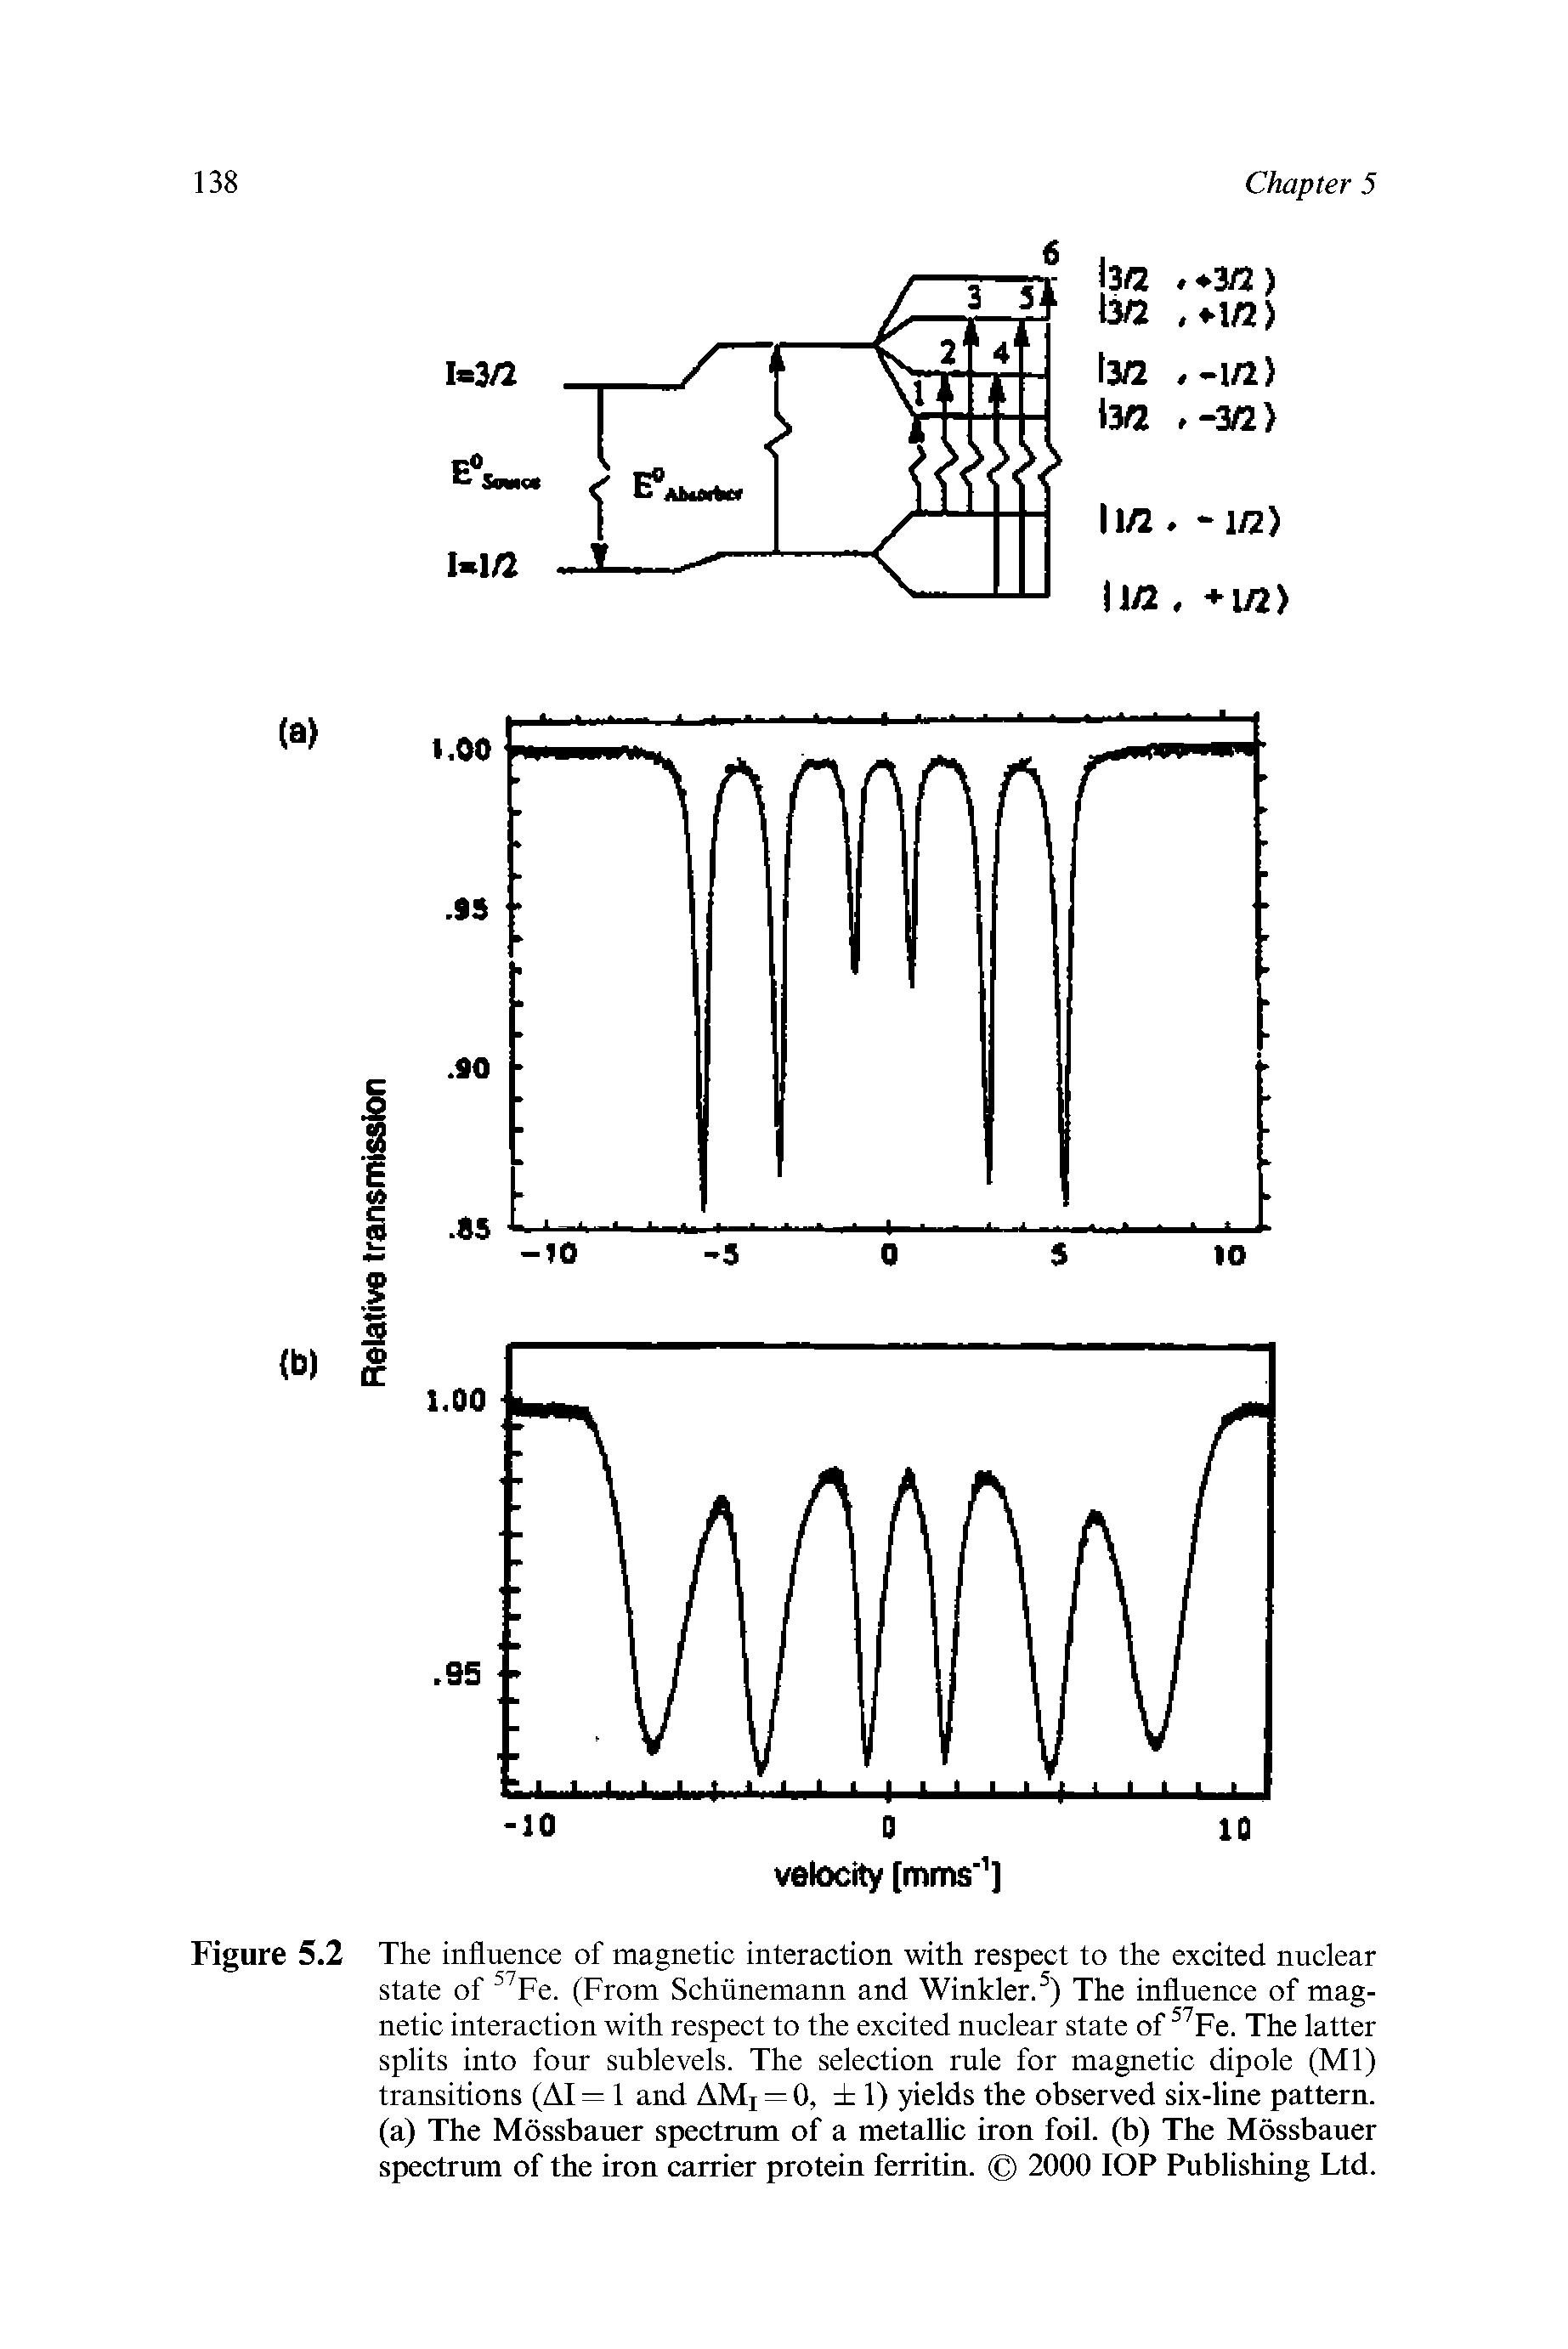 Figure 5.2 The influence of magnetic interaction with respect to the excited nuclear state of Fe. (From Schiinemann and Winkler. ) The influence of magnetic interaction with respect to the excited nuclear state of Fe. The latter splits into four sublevels. The selection rule for magnetic dipole (Ml) transitions (AI = 1 and AMi = 0, 1) yields the observed six-line pattern, (a) The Mossbauer spectrum of a metaUic iron foil, (b) The Mossbauer spectrum of the iron carrier protein ferritin. 2000 lOP Publishing Ltd.